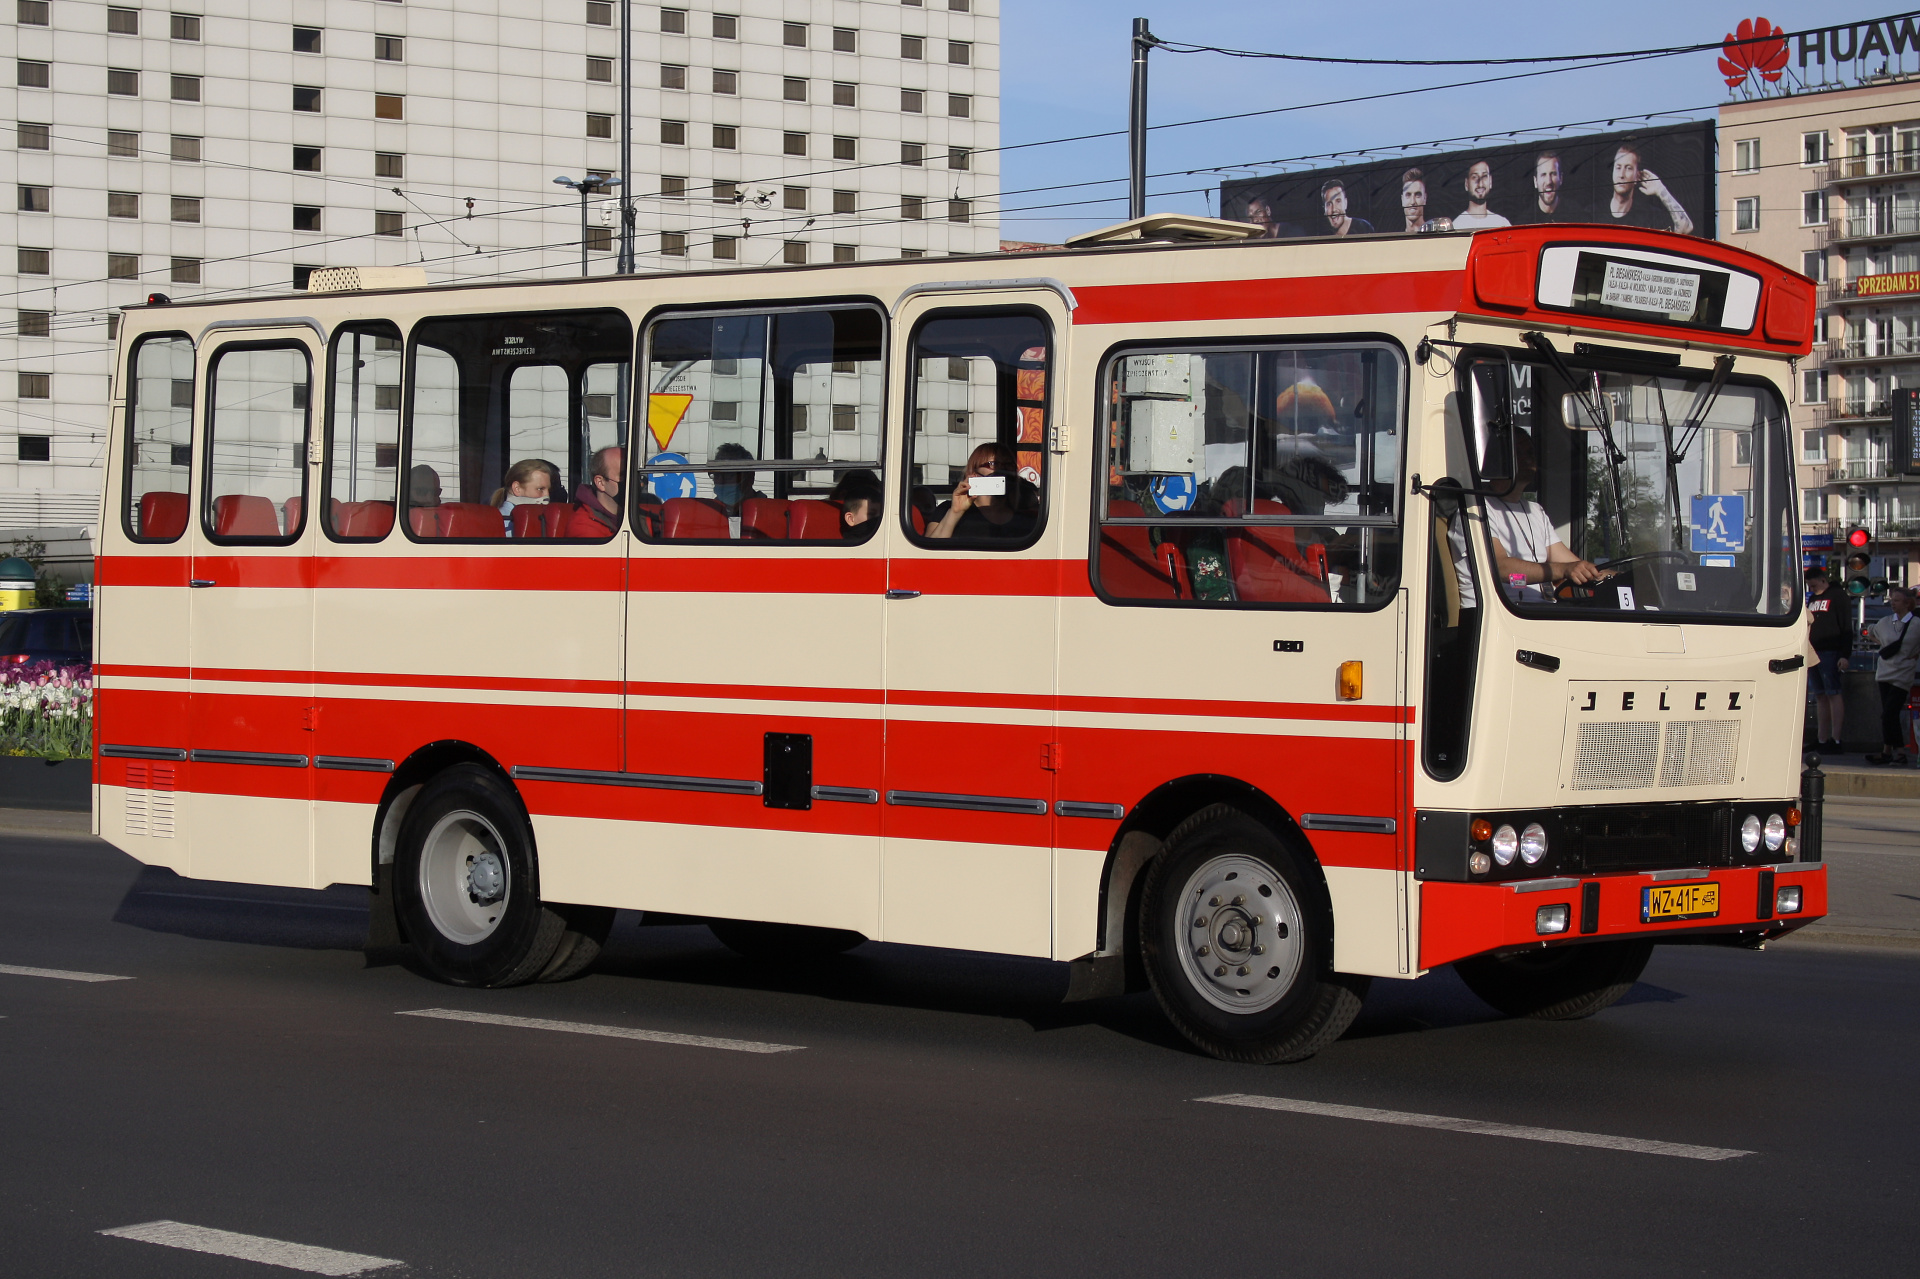 Jelcz 080 (Vehicles » Vintage cars and buses)